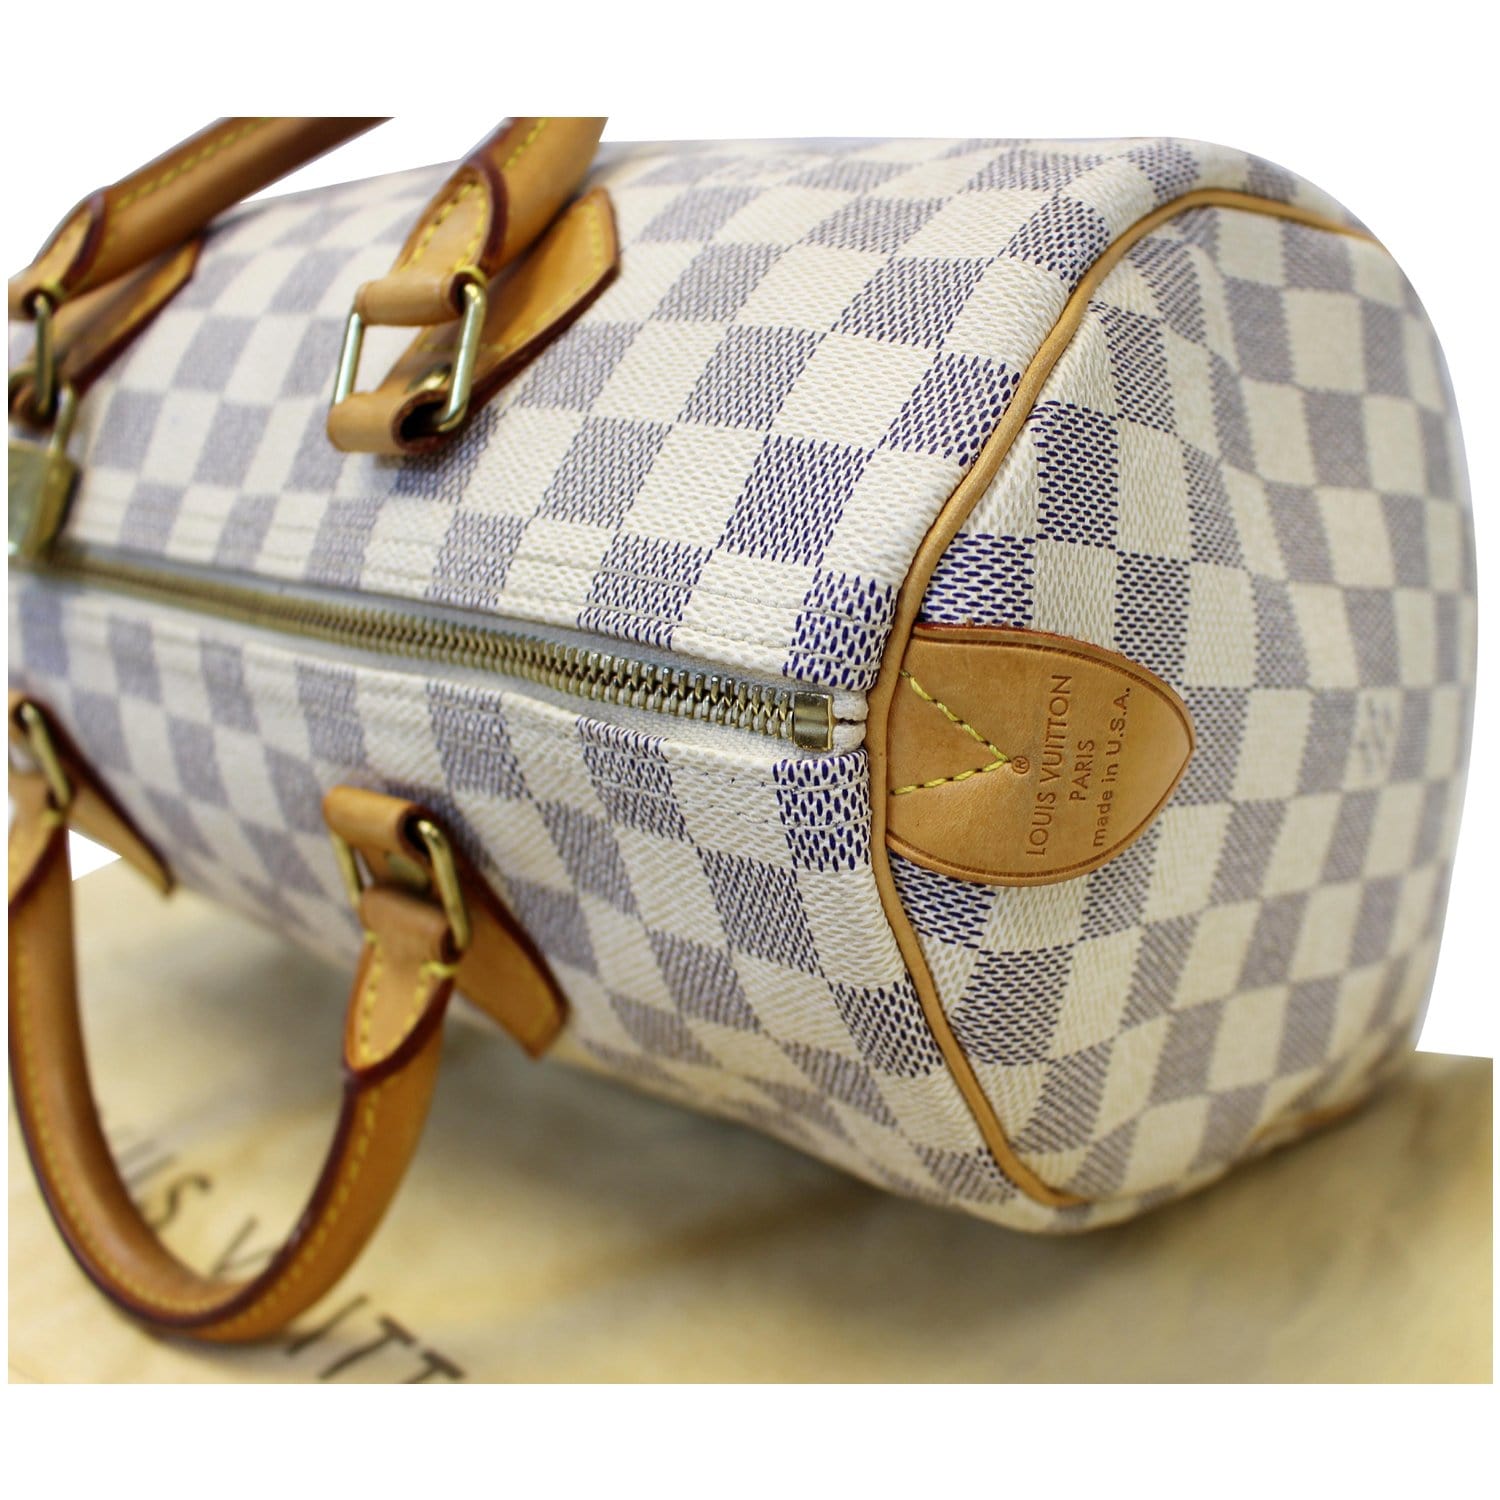 Louis Vuitton Speedy Bandouliere: Affordable Iconic